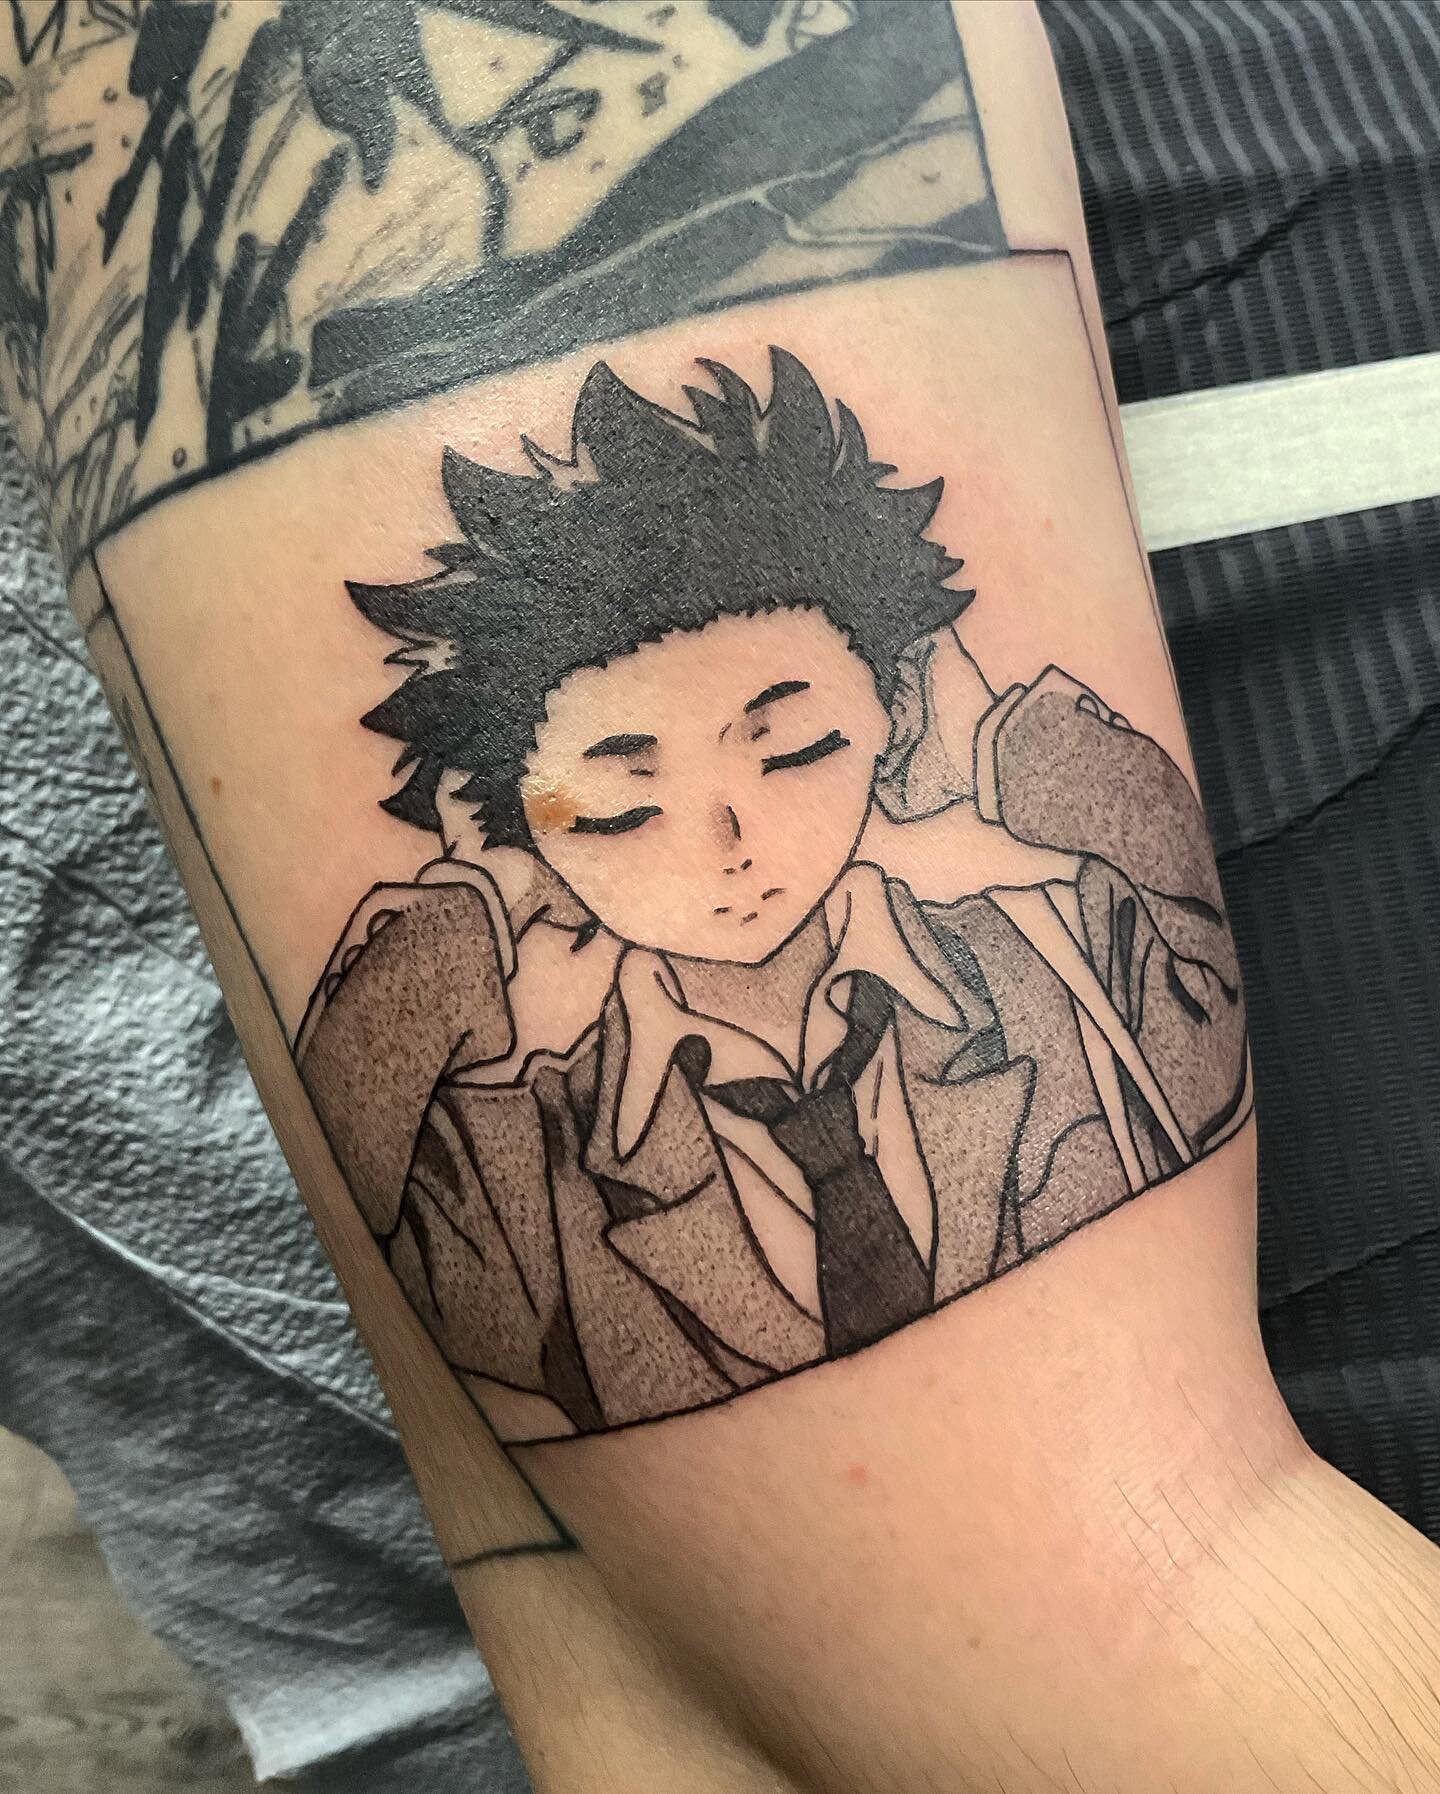 Shoya from A Silent Voice for Isabella! I have have fun doing stippled manga tattoos